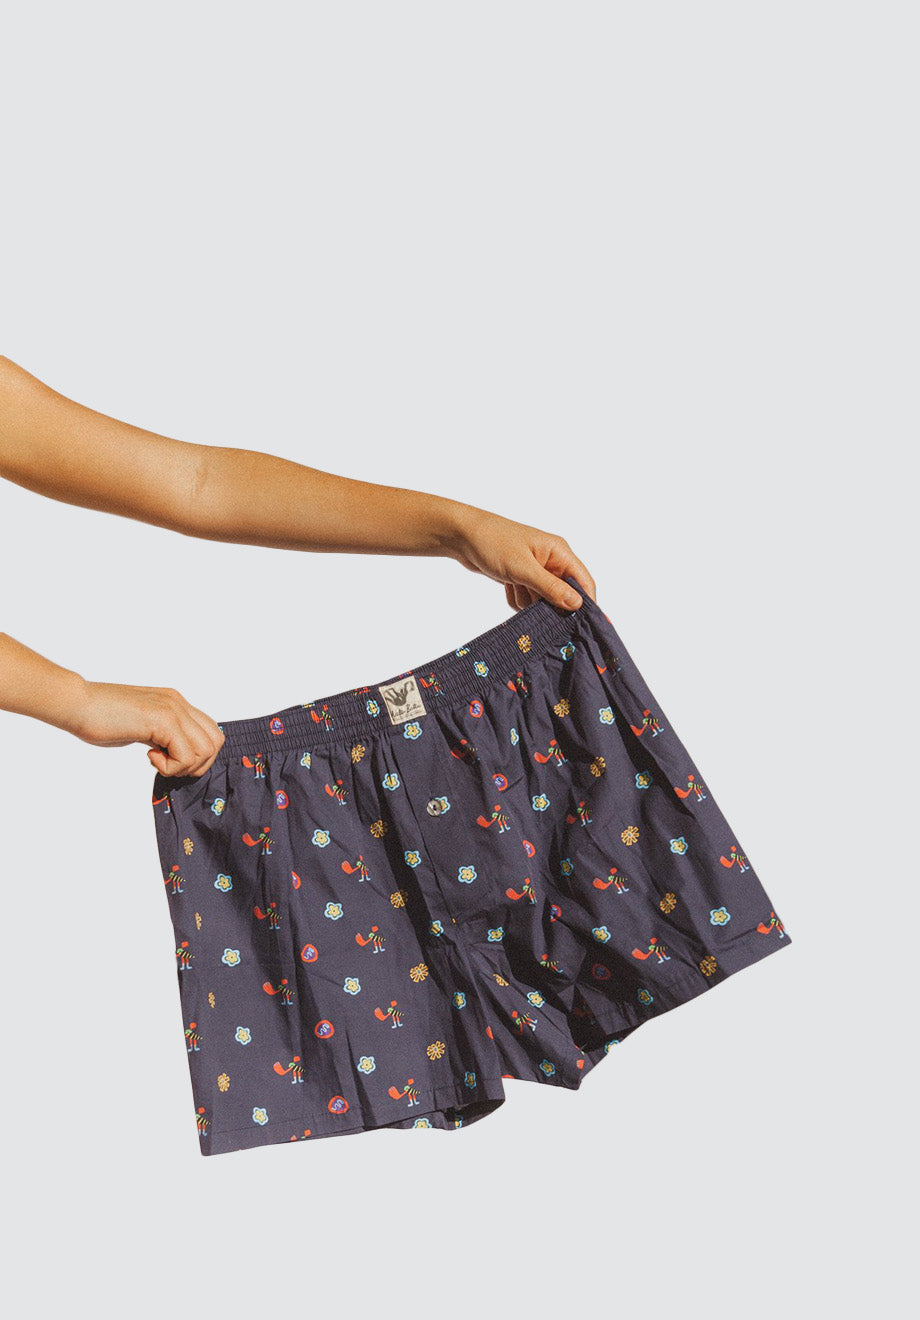 The ‘Busy-Bee’ Boxer Shorts